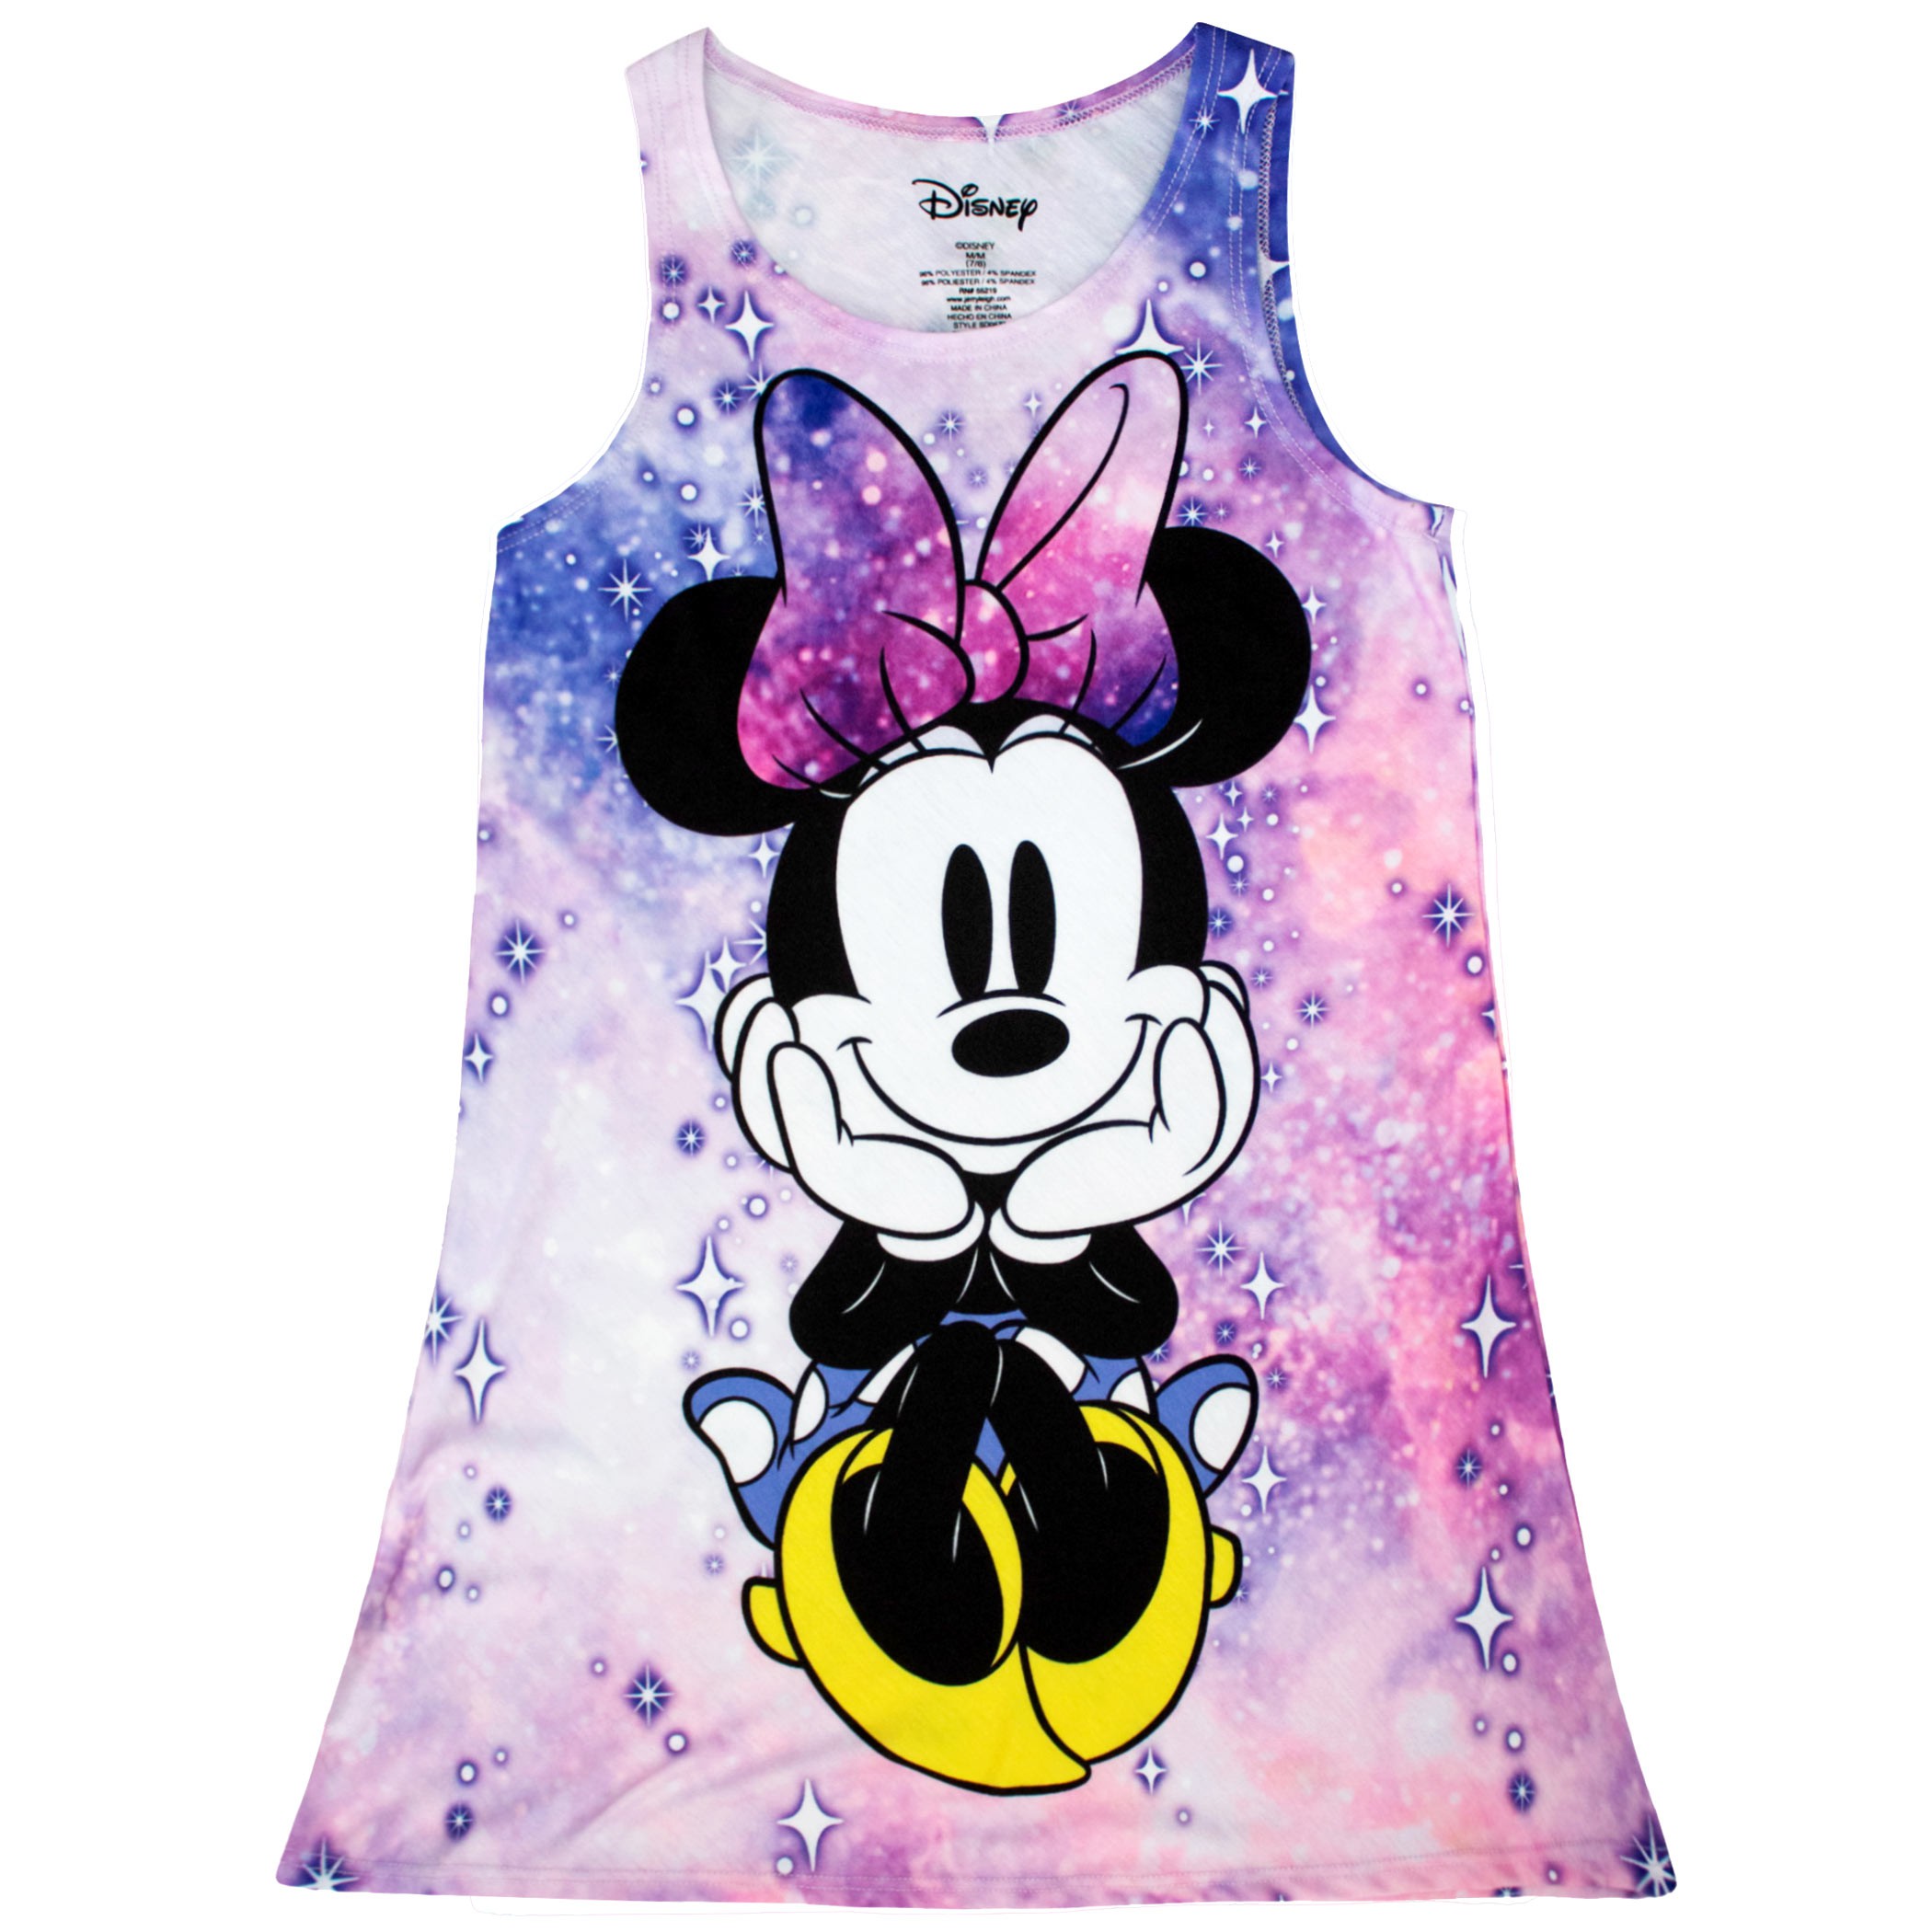 Minnie Mouse Space Pink Youth Girl's Dress